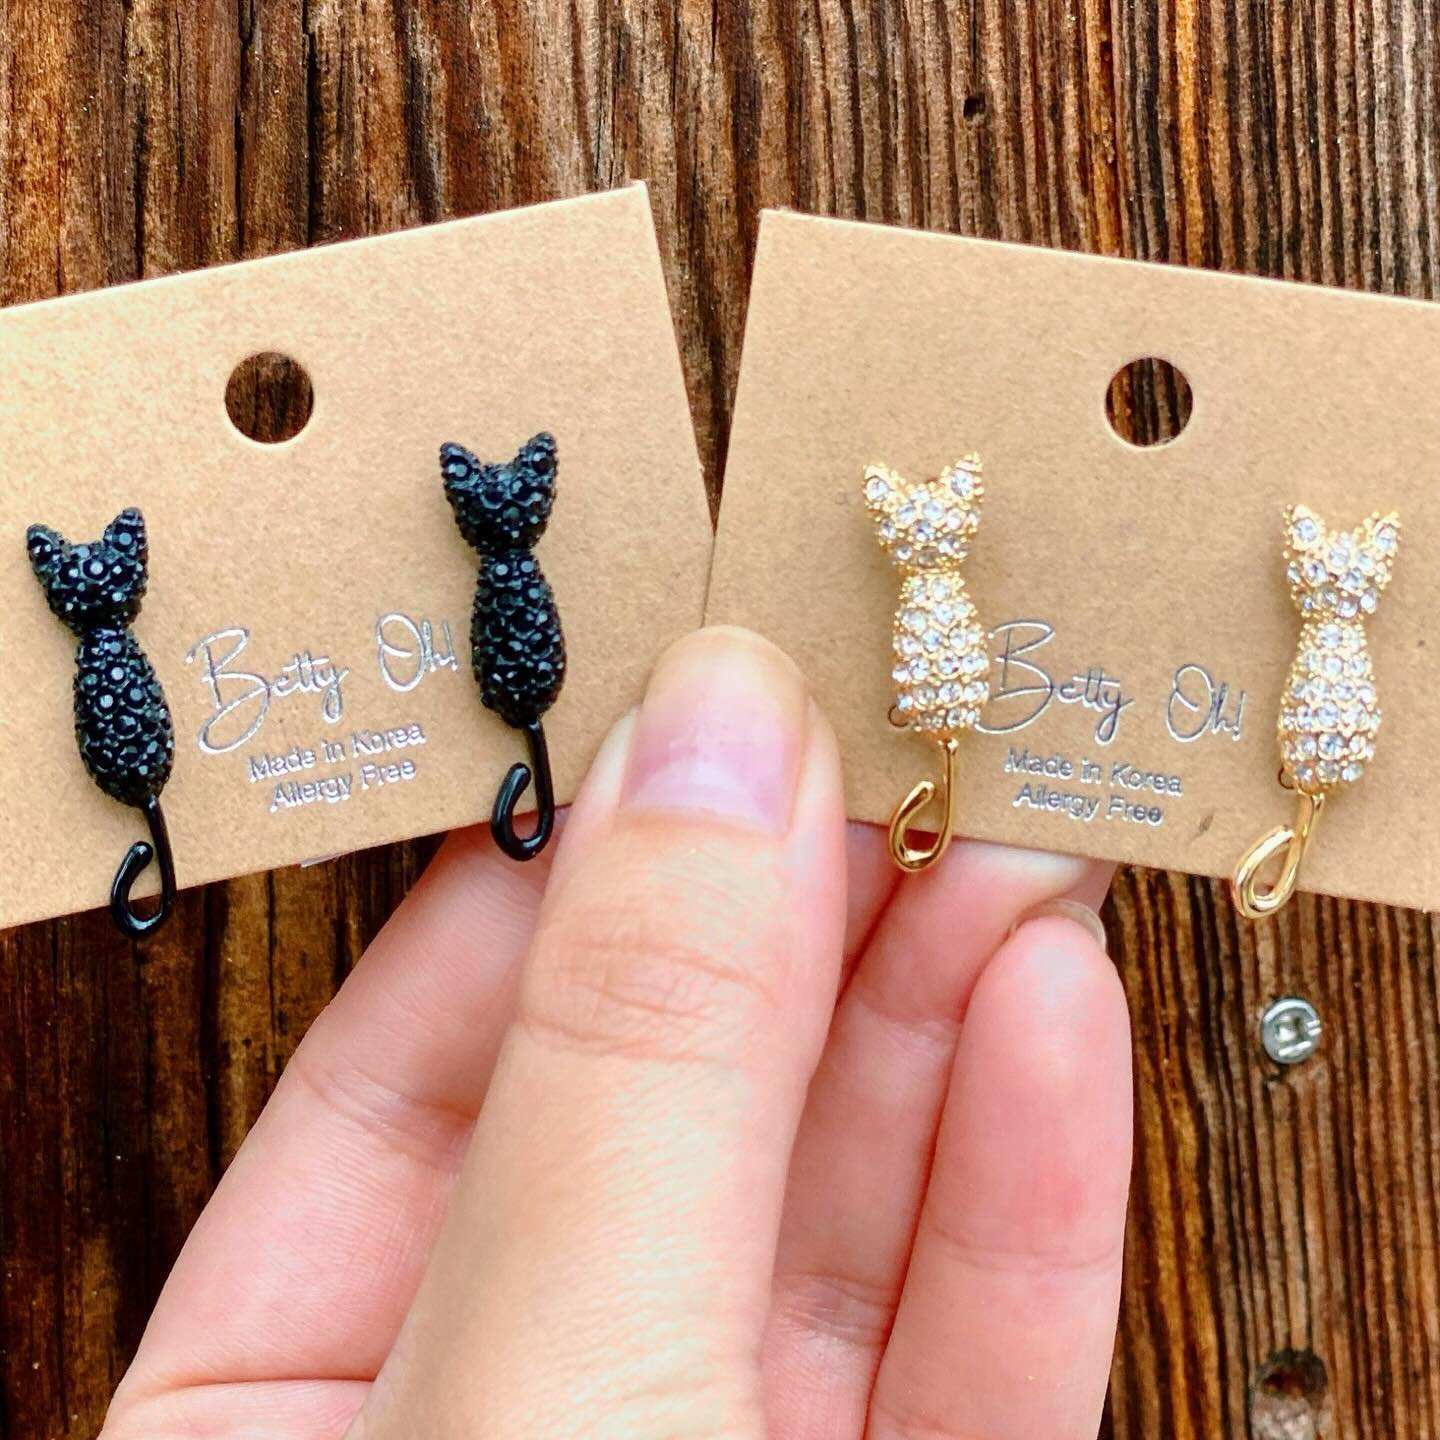 Purrfect jewelry for Mom! Swipe through to the end for maximum floof 😂🩷